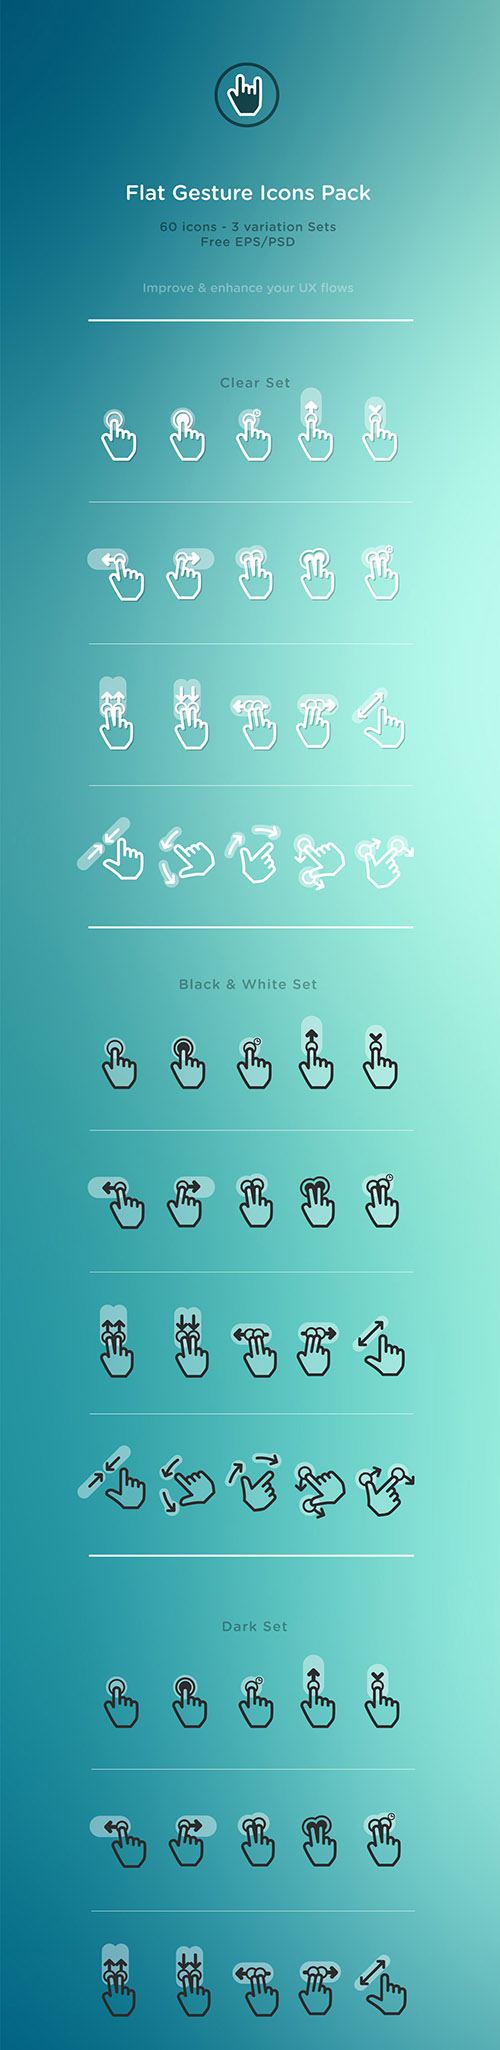 AI Vector Web Icons - Flat Gesture Icons Pack